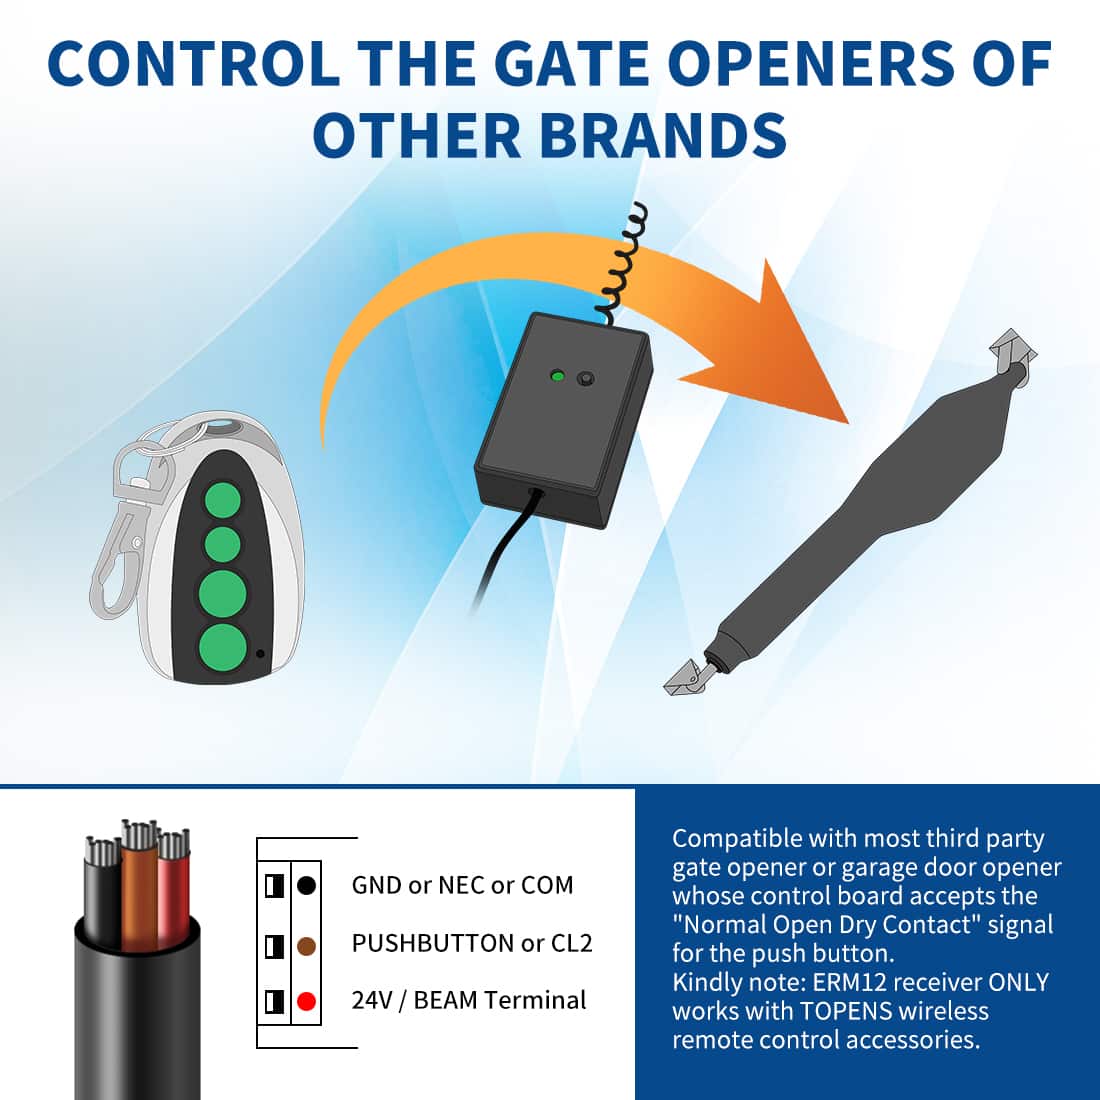 ERM12 Gate Remote Receiver for Other Brand Gate Openers